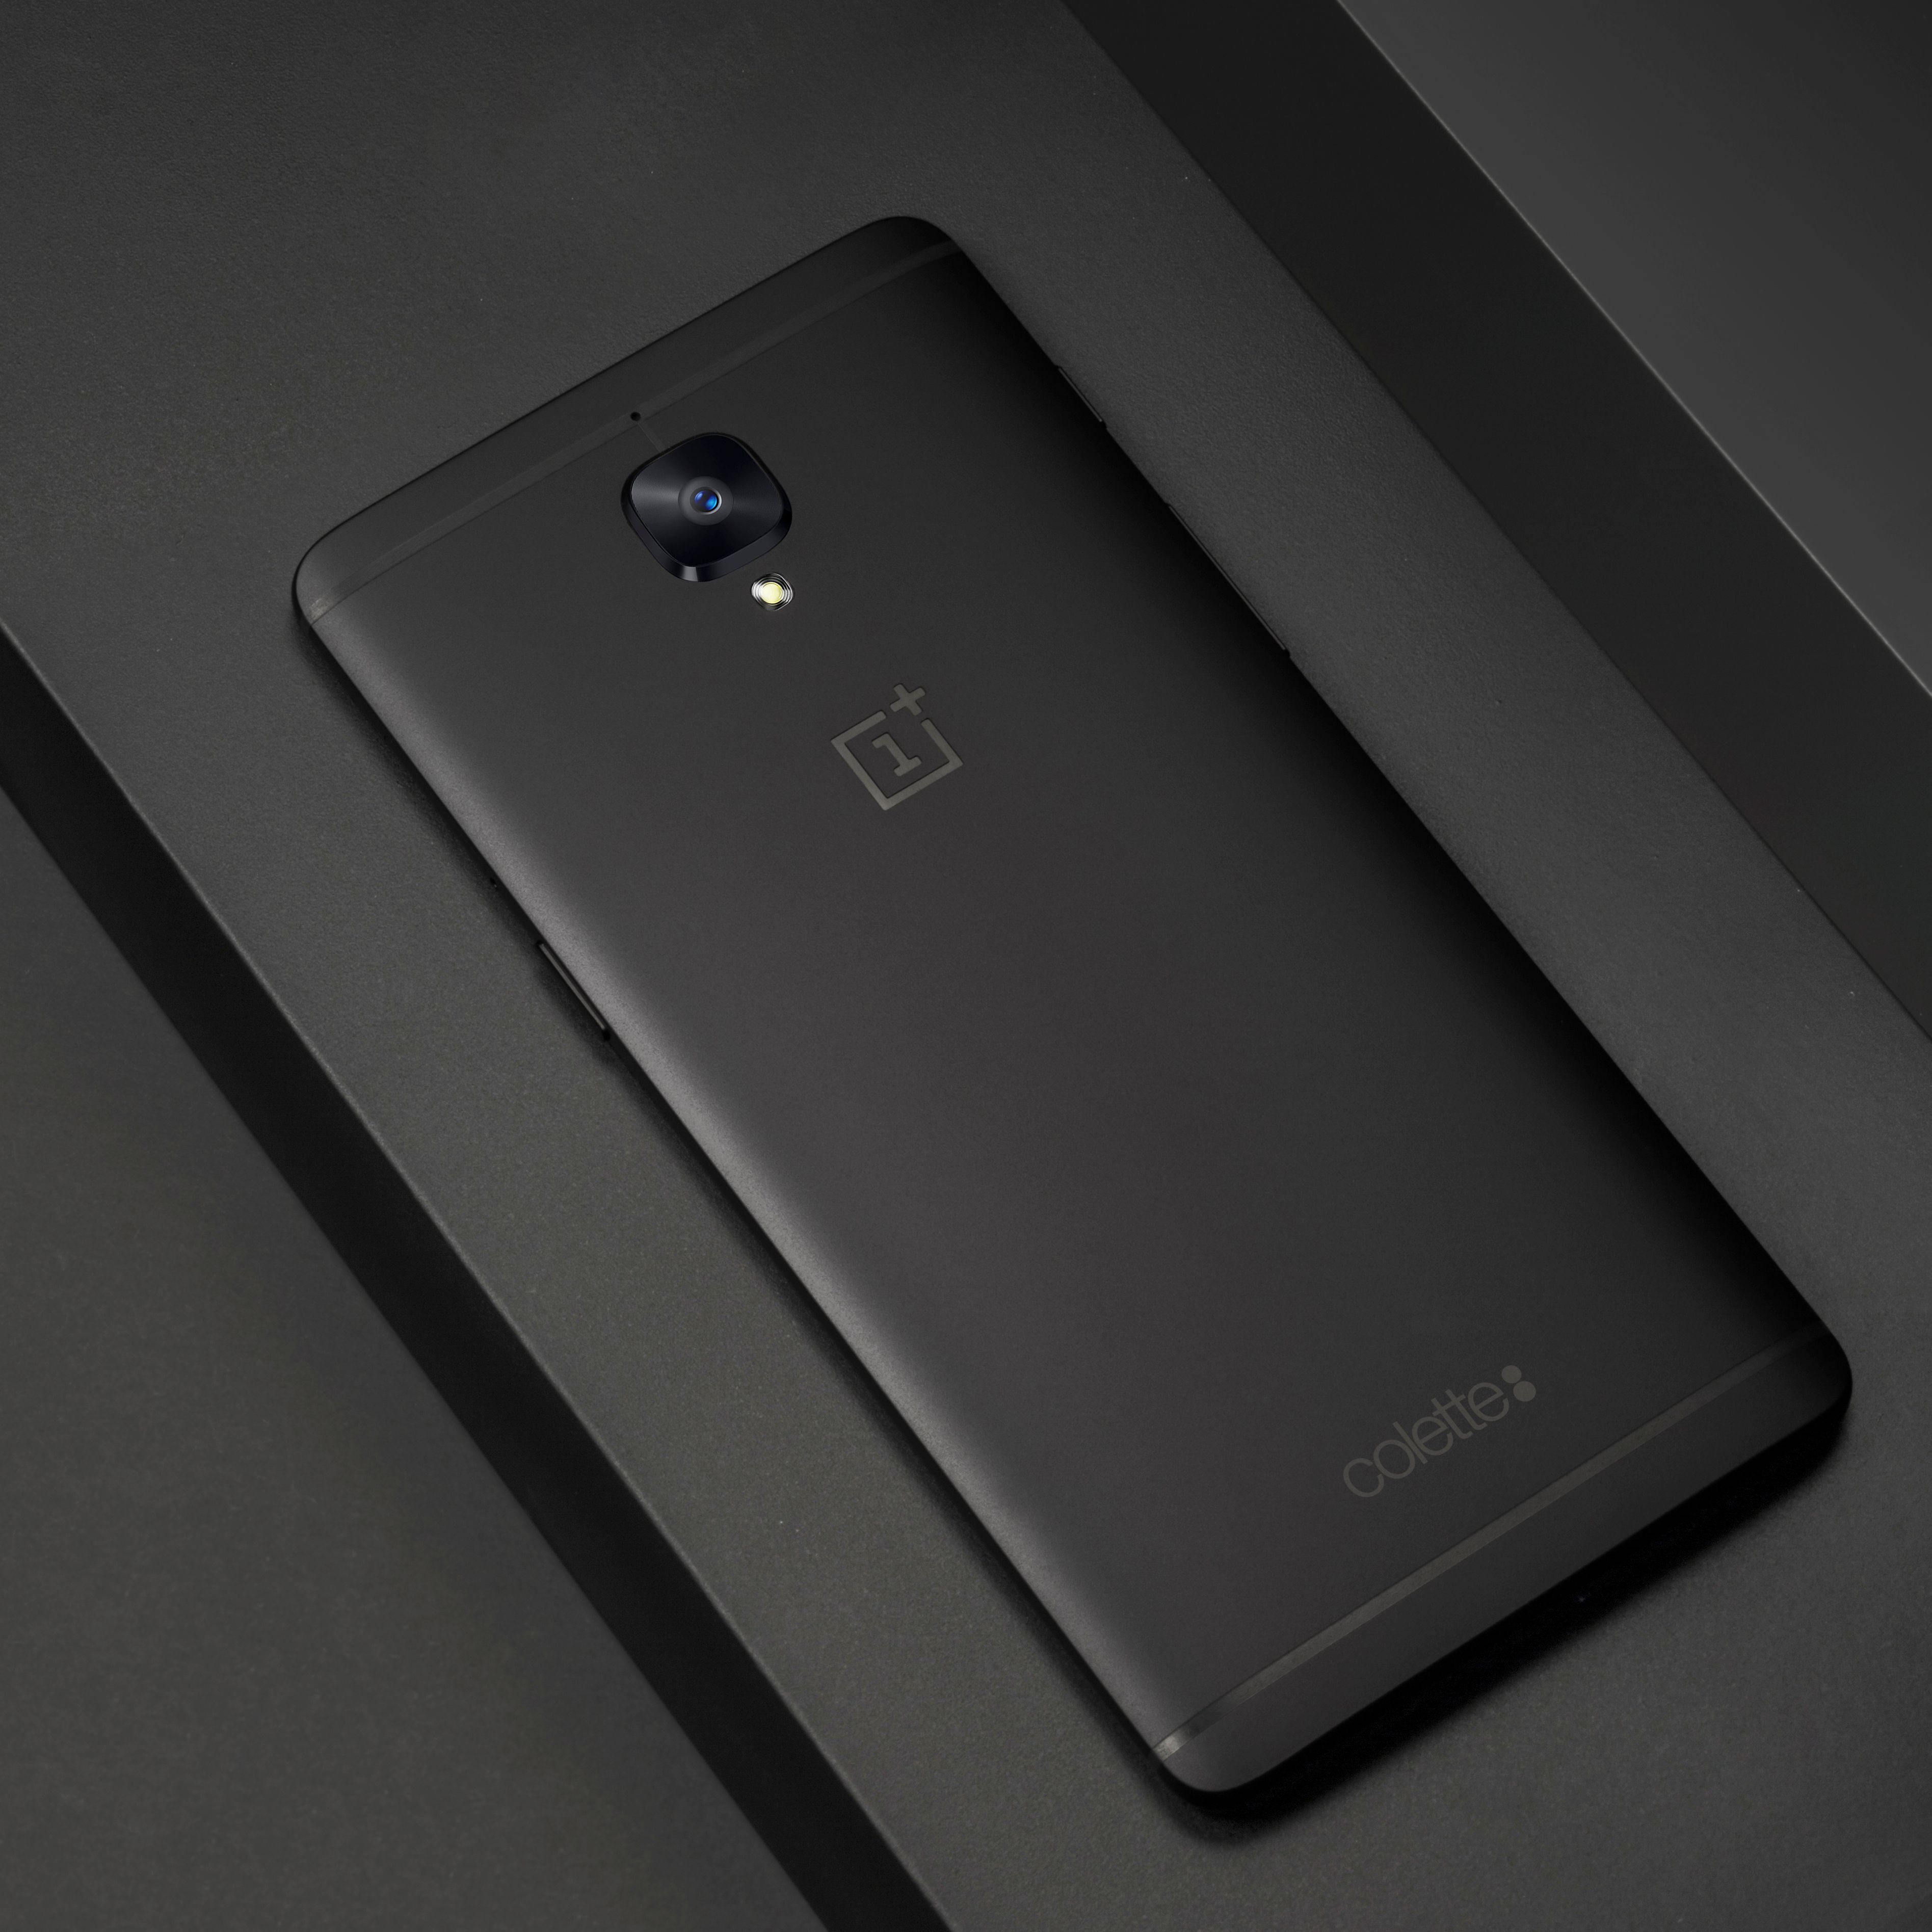 oneplus teams up with colette to launch limited edition oneplus 3t image 2